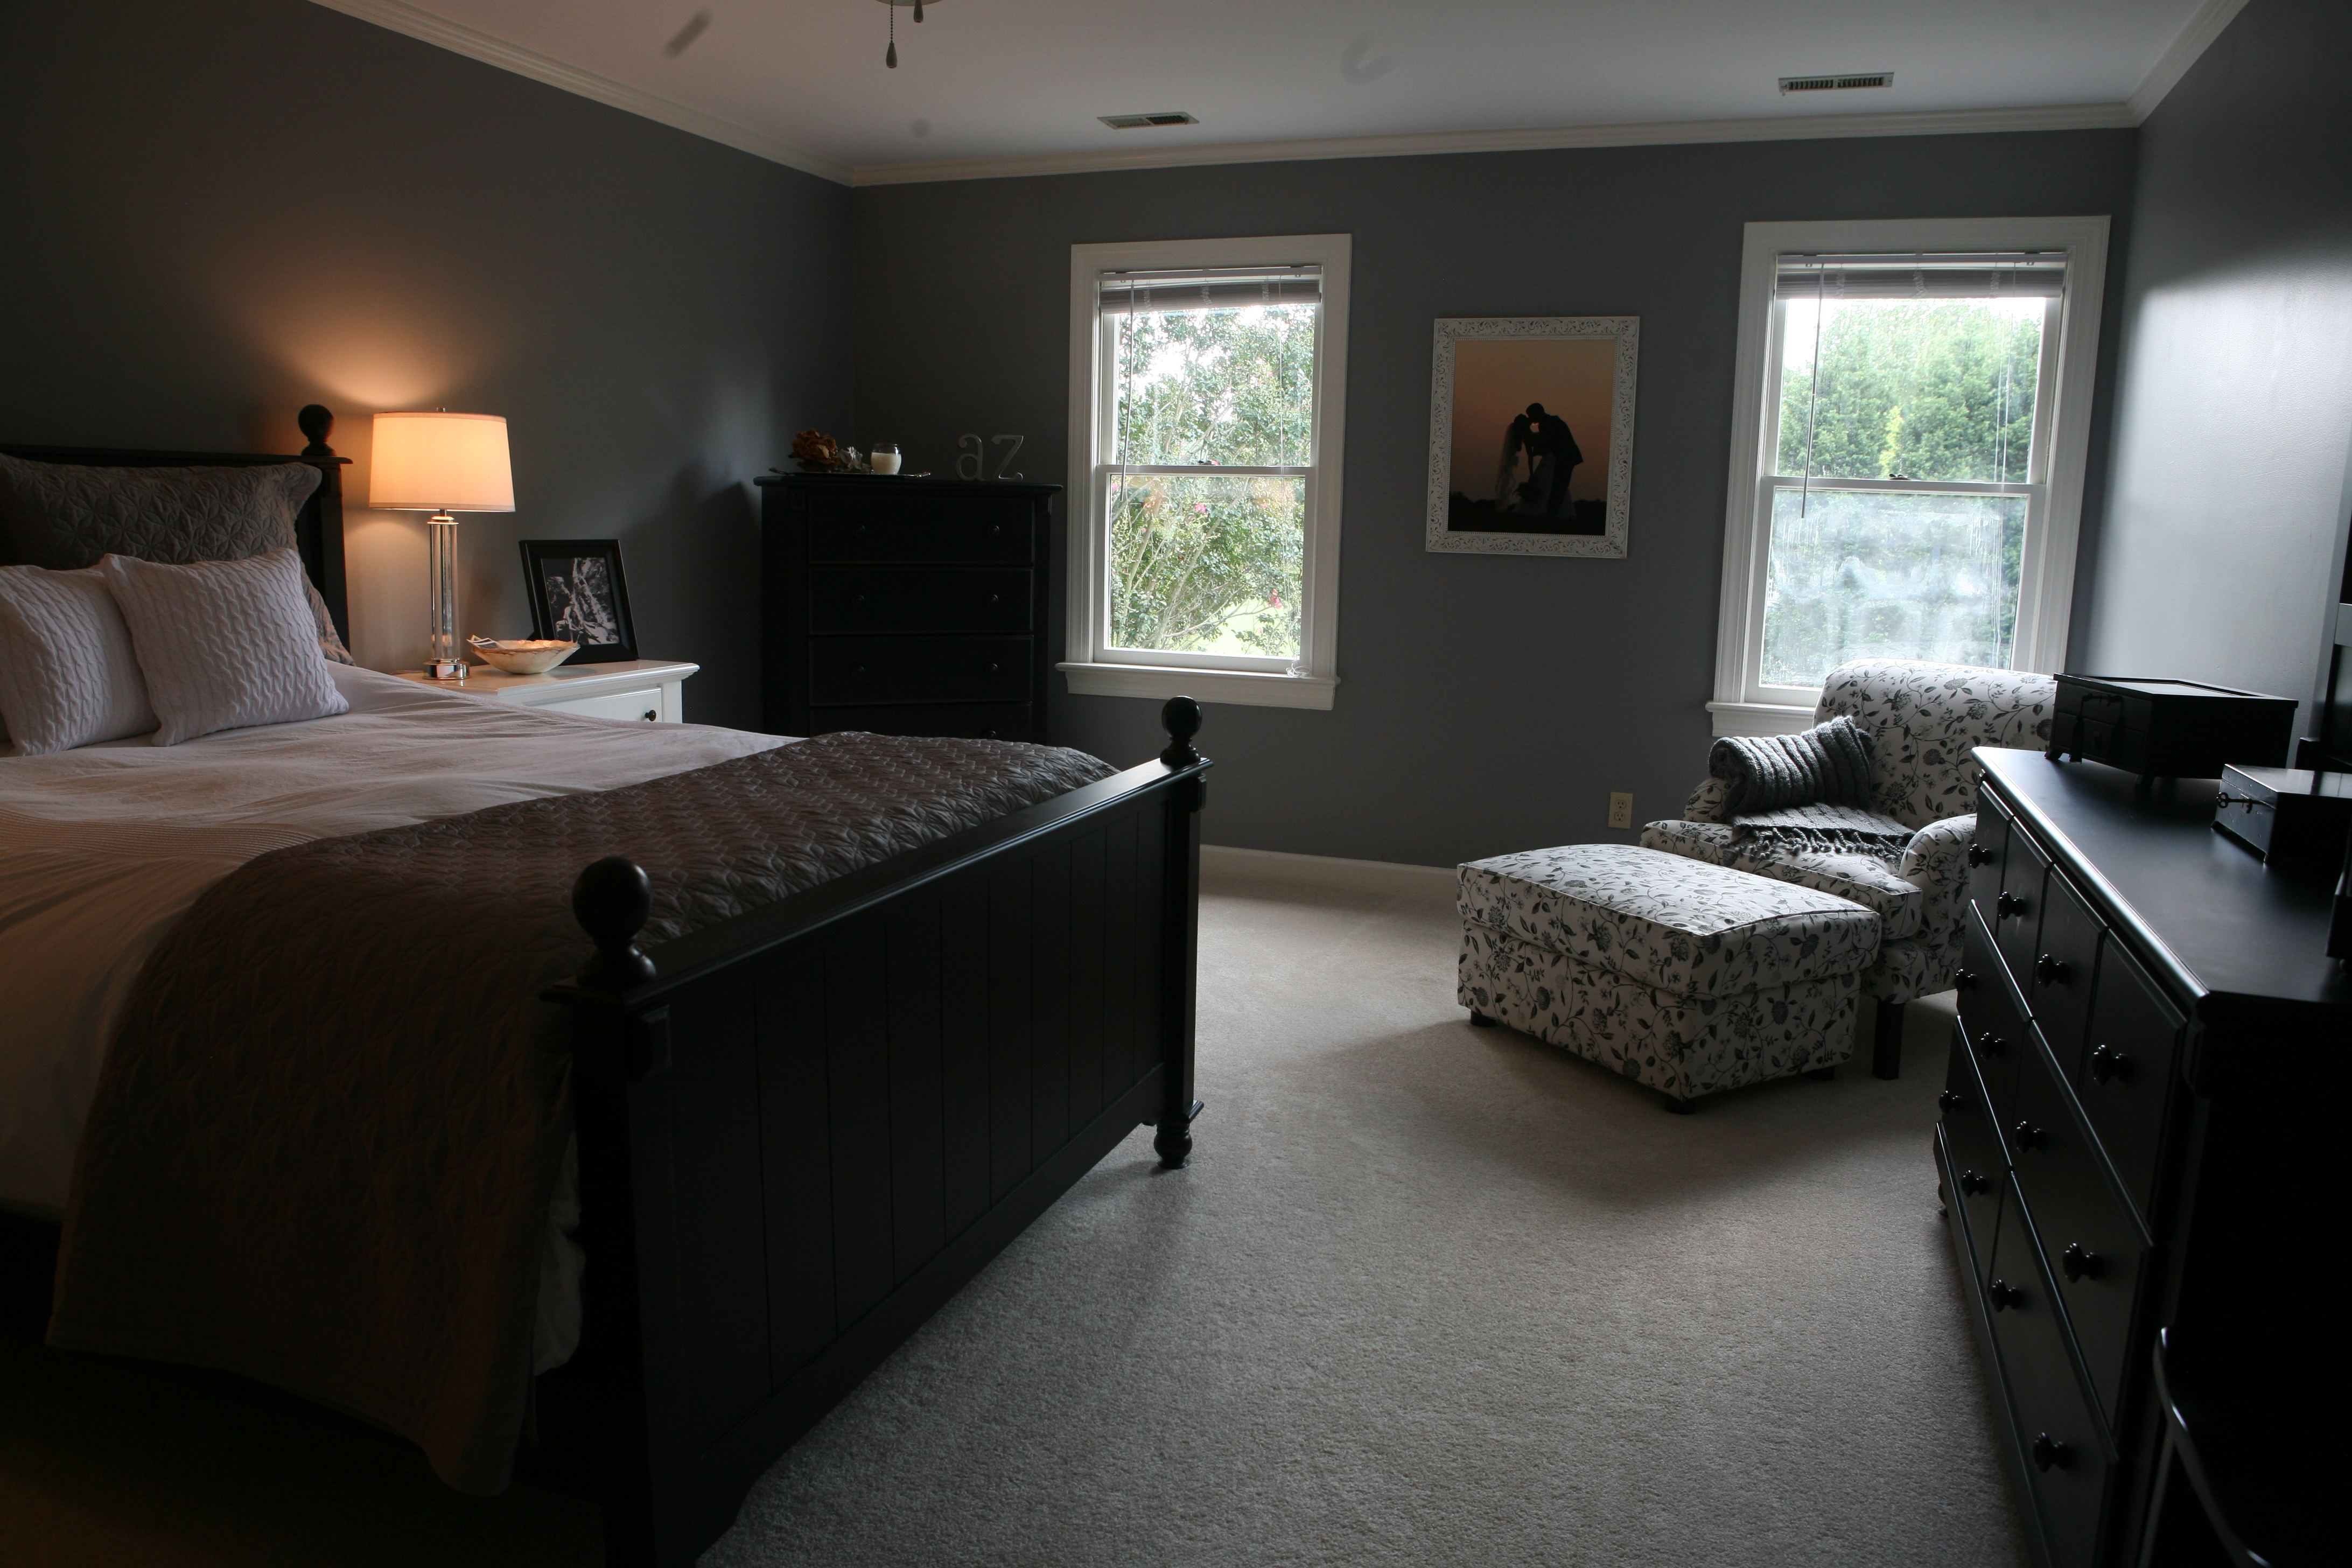 House Tour: Master Bedroom – just the right Angle